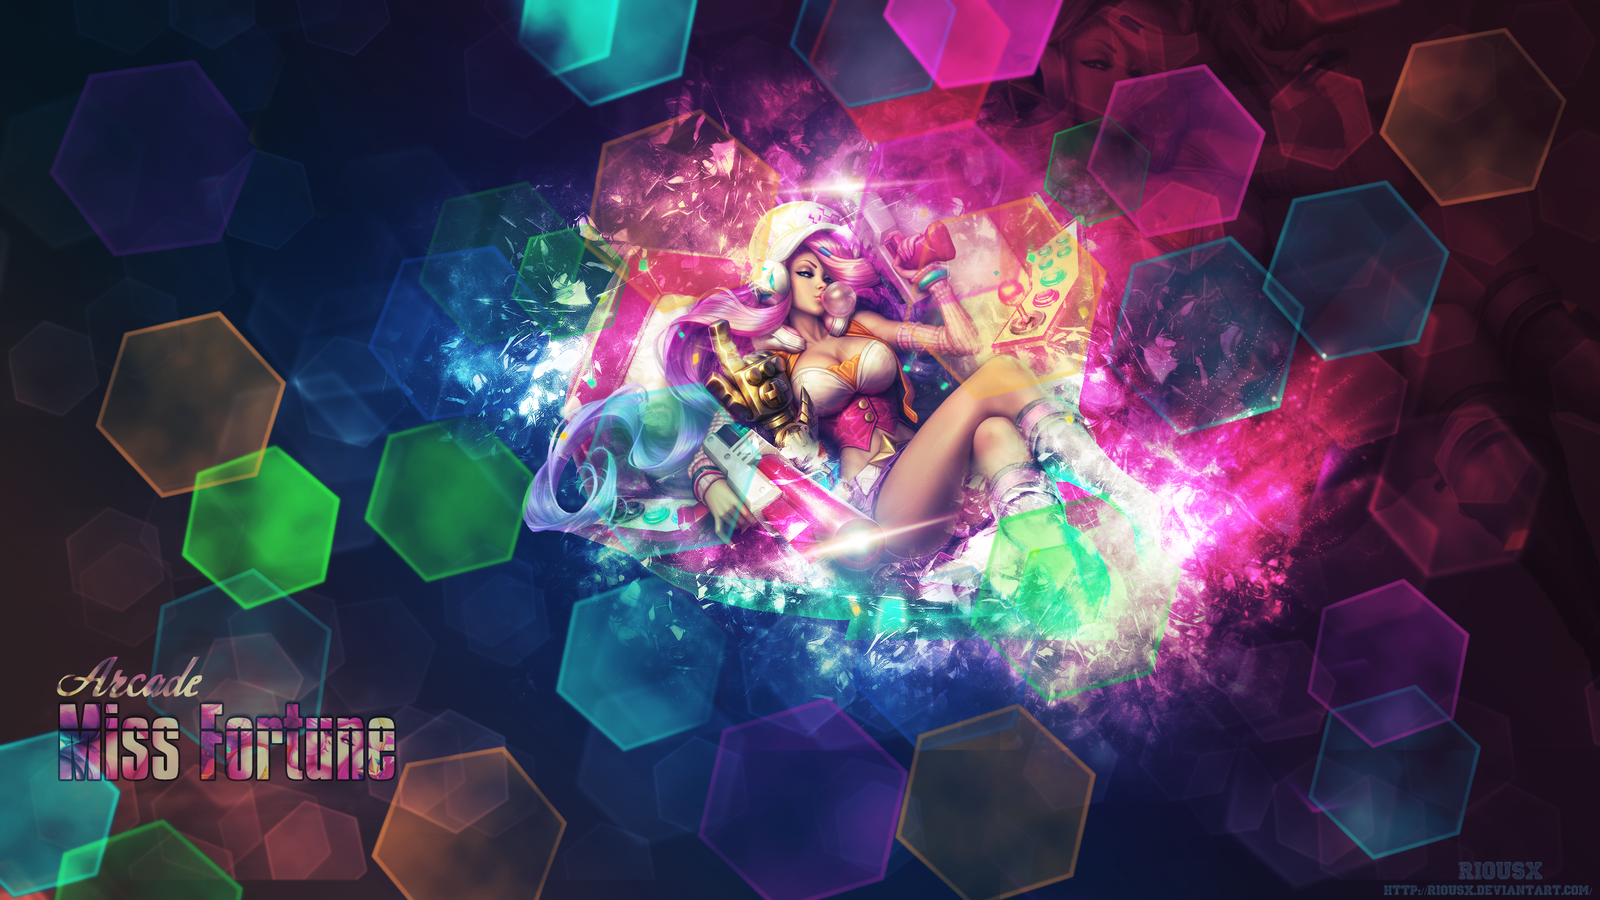 Arcade Miss Fortune Wallpaper By Riousx